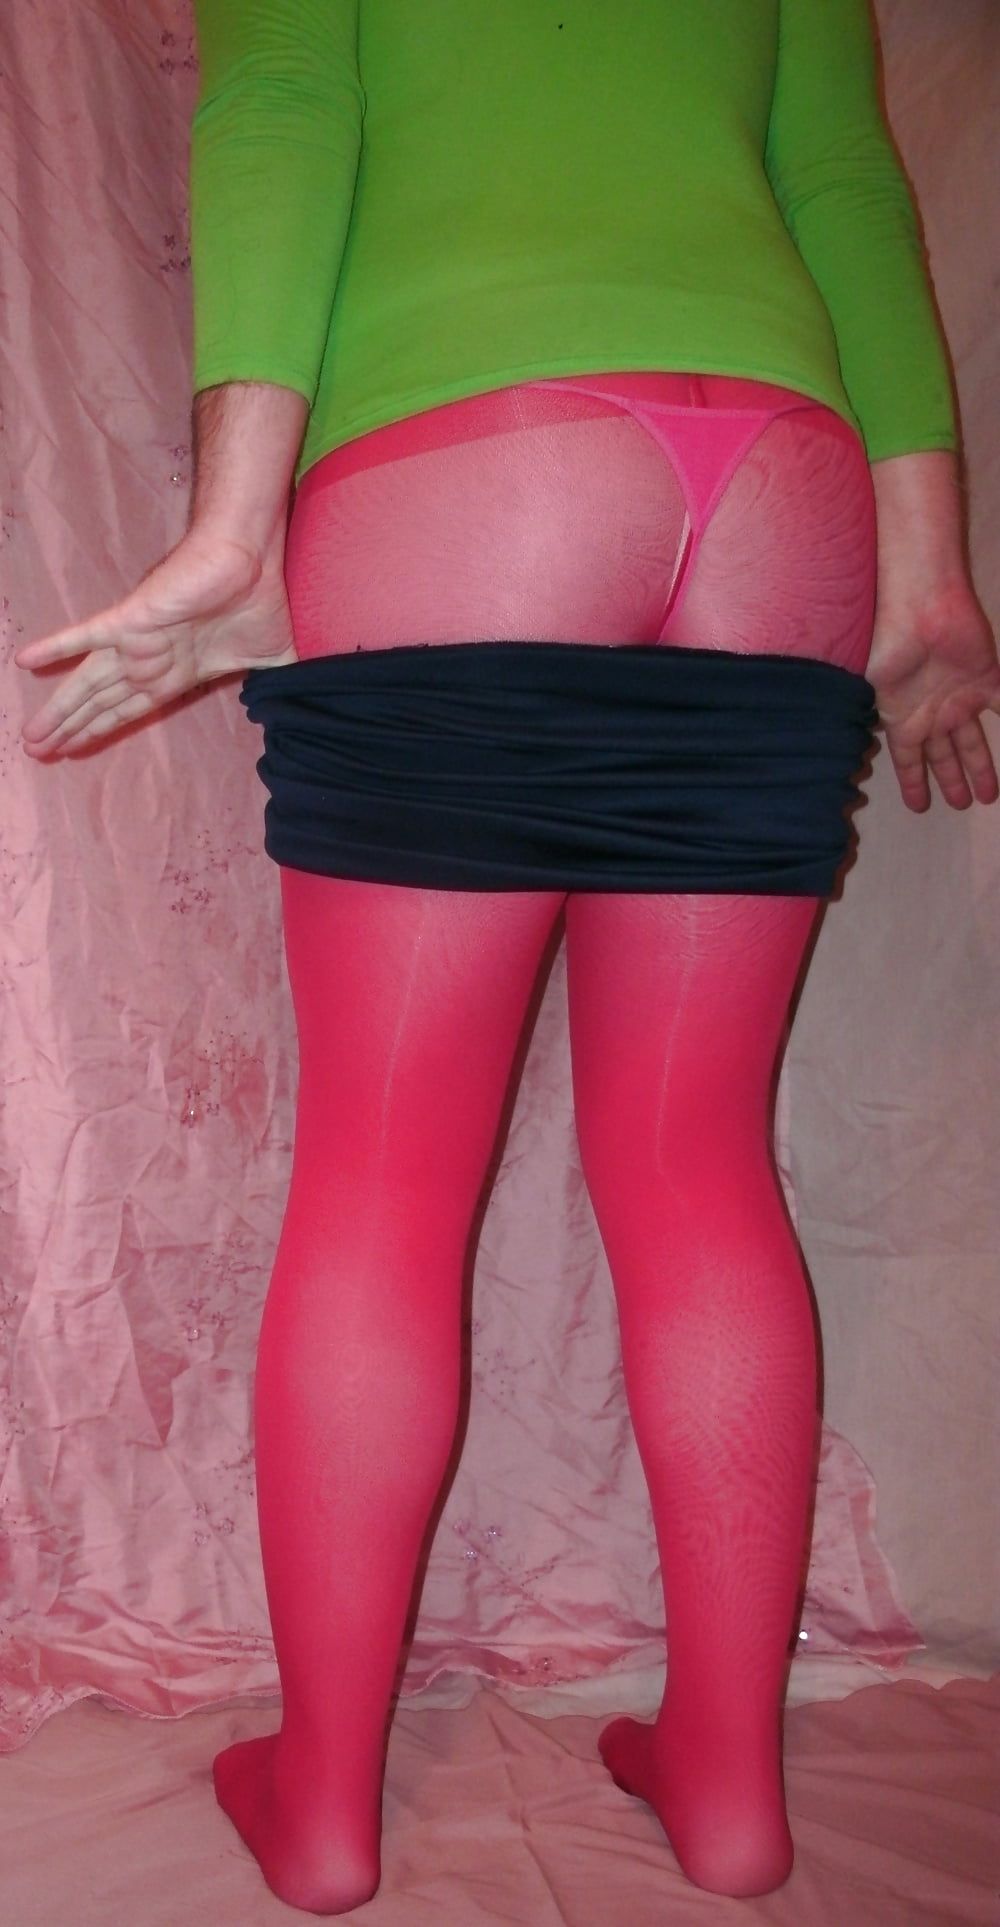 Red stockings 2 #15